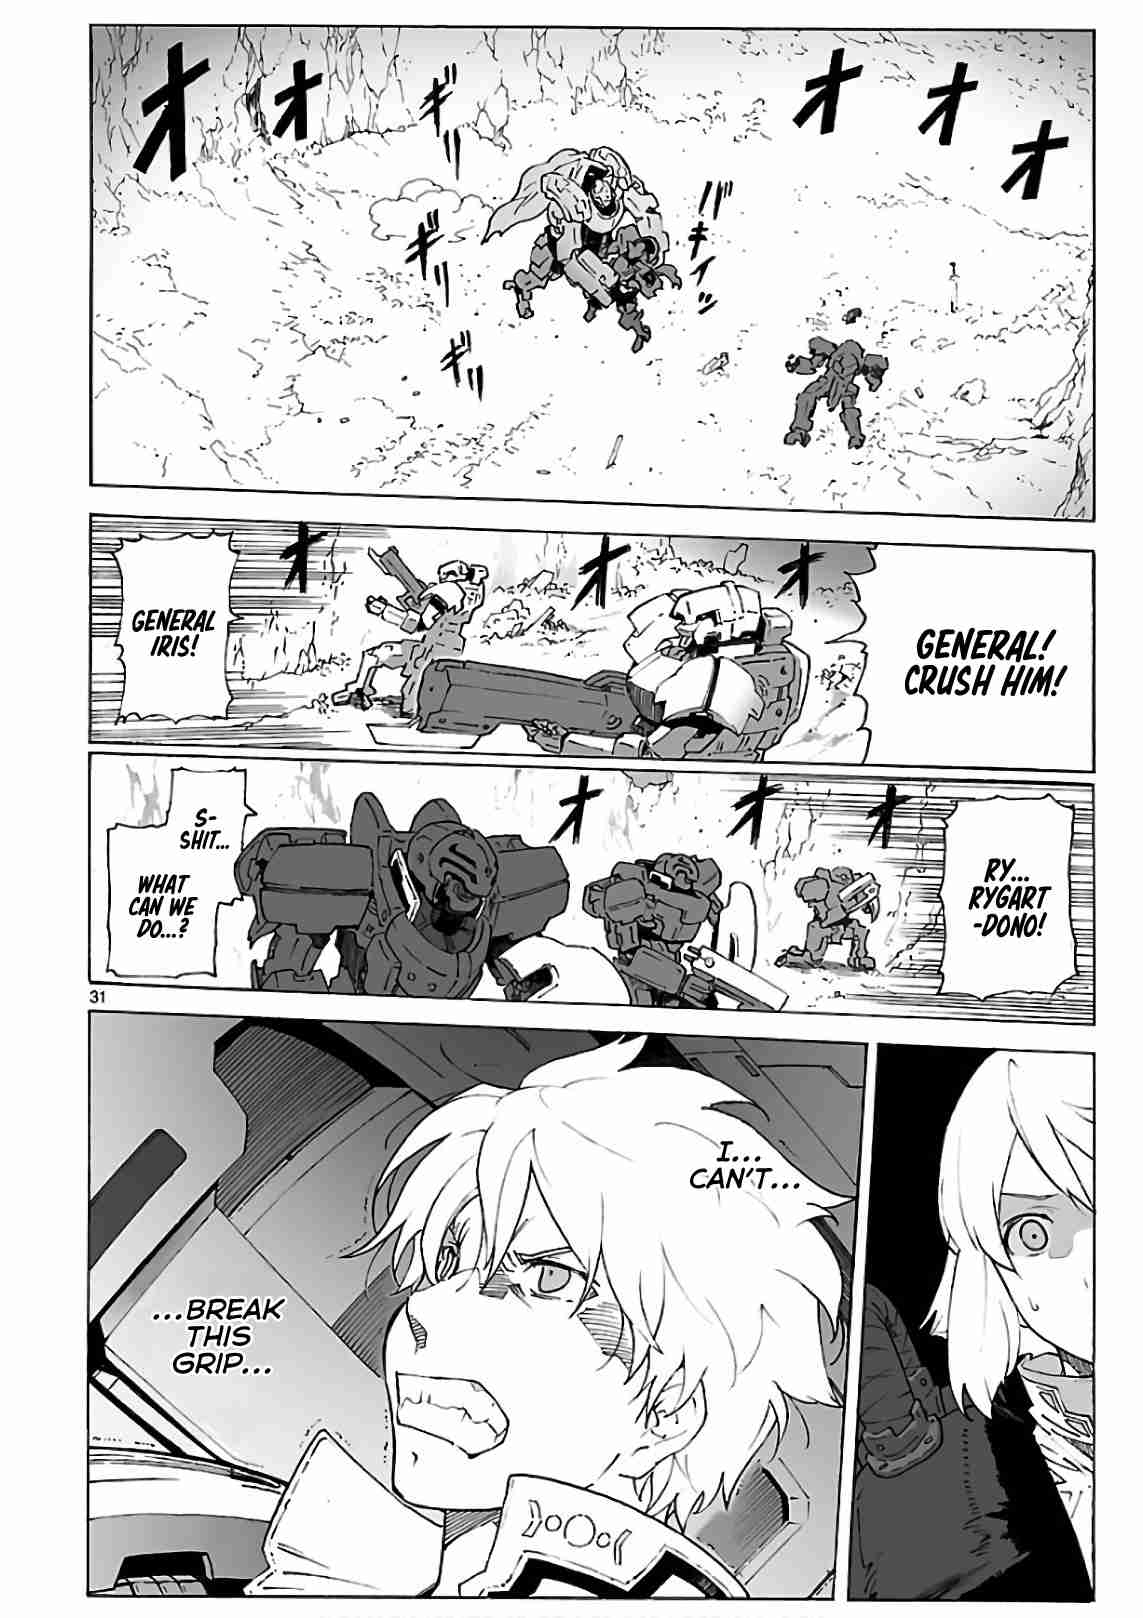 Break Blade Vol. 17 Ch. 92 Carrying Out One's Original Intentions